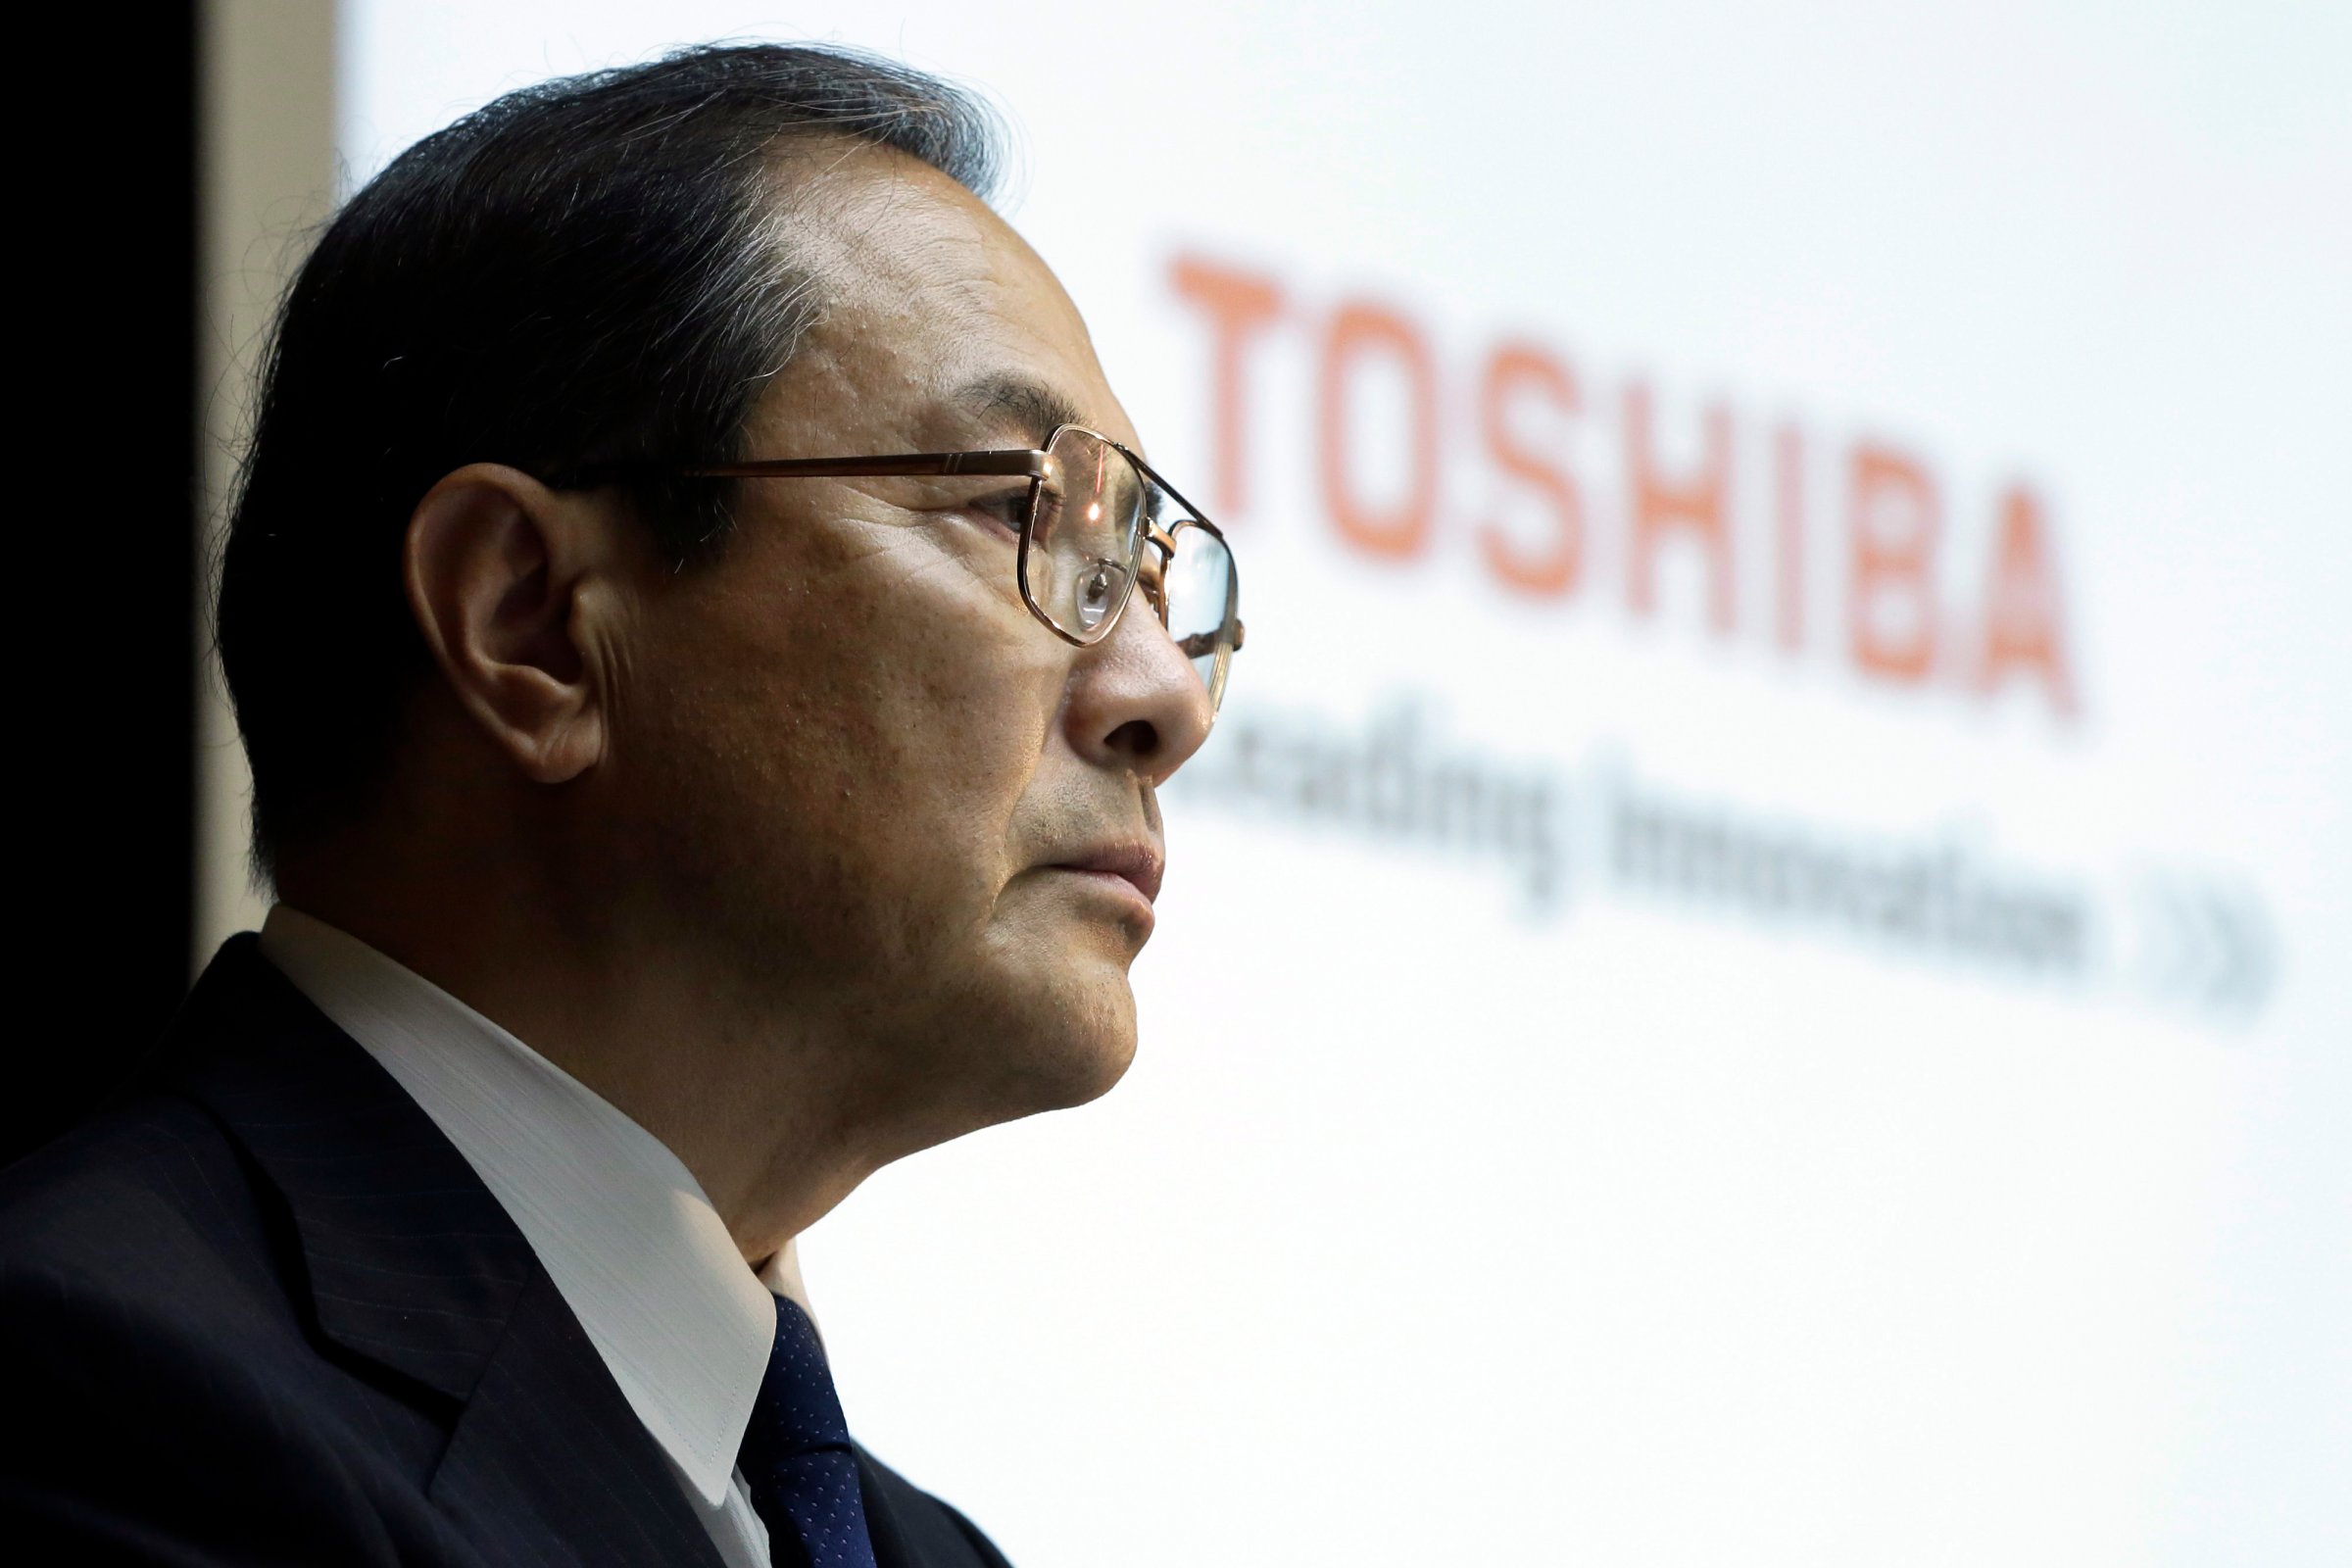 Toshiba Corp. President Masashi Muromachi Attends Earnings News Conference